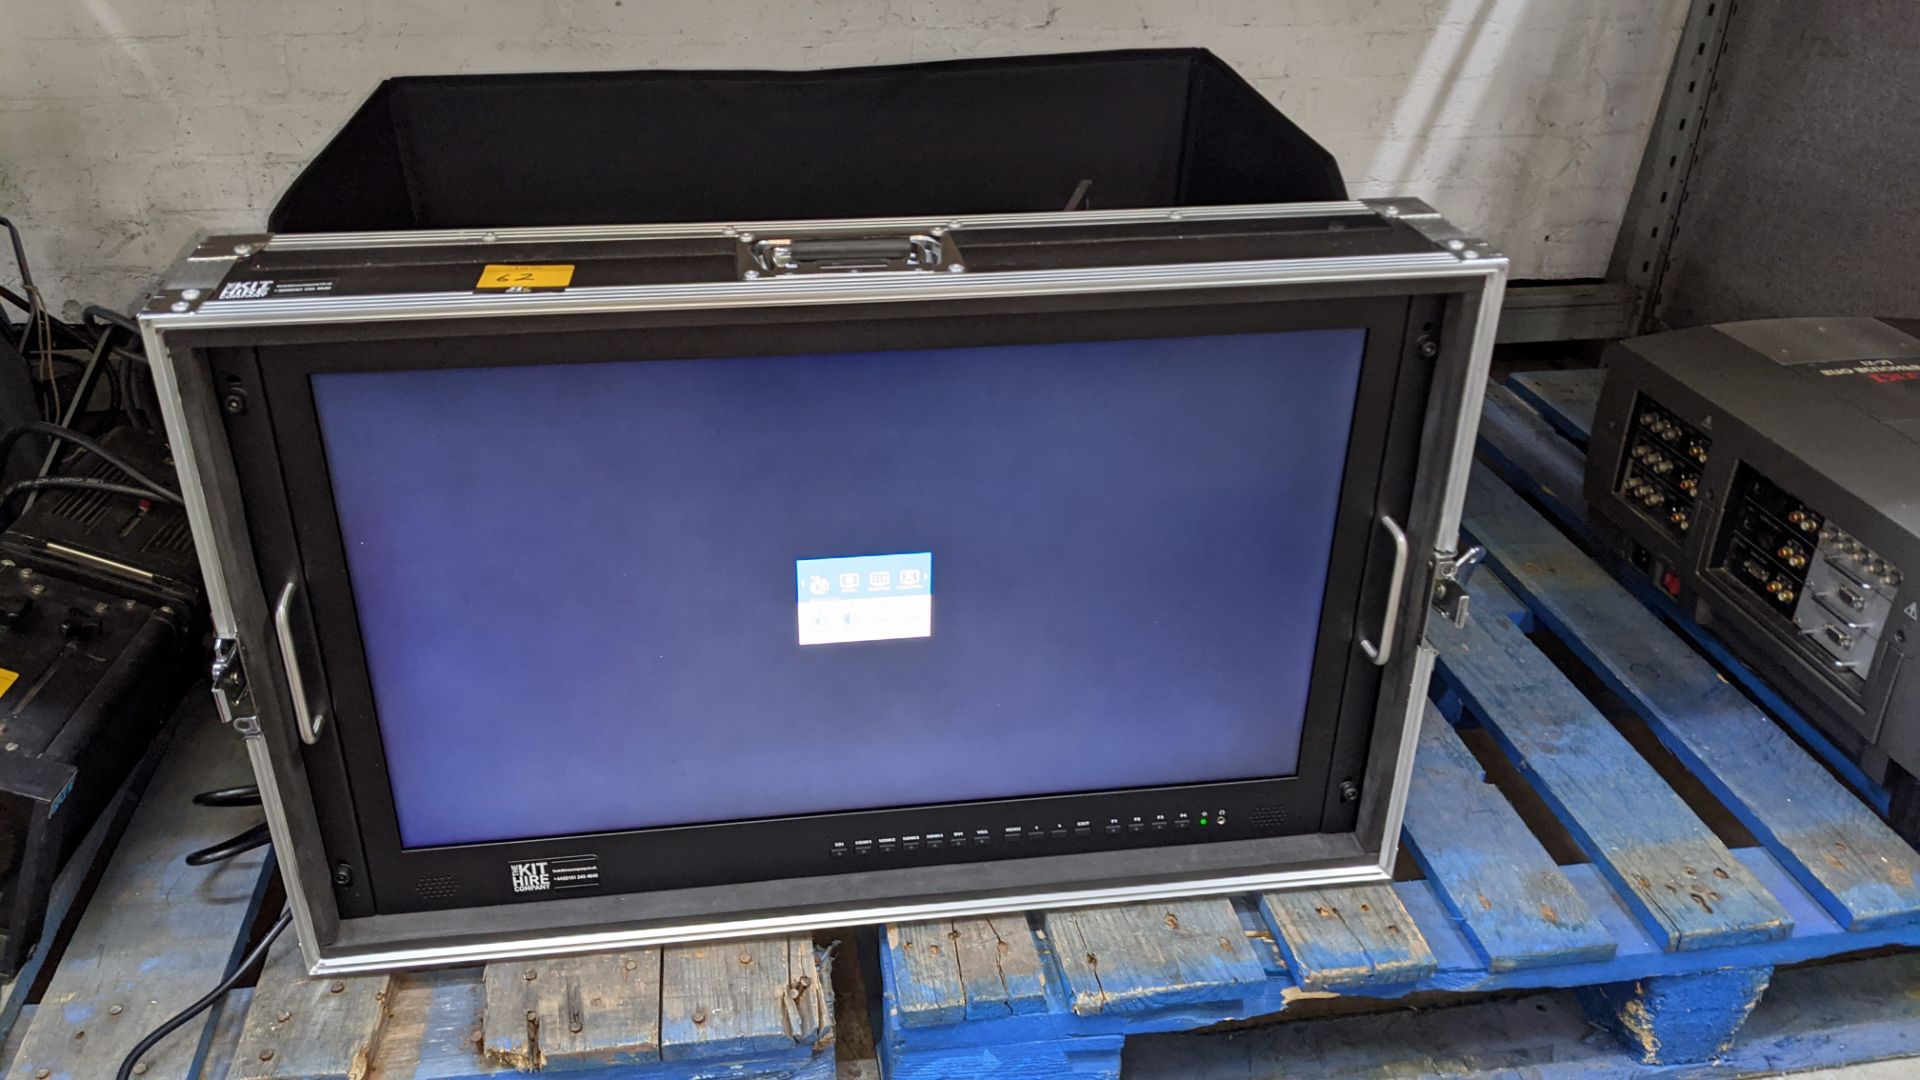 Lilliput BM280-4KS: 28" 4K widescreen field monitor with 3D LUTS and HDR, in built-in flight case - Image 3 of 13